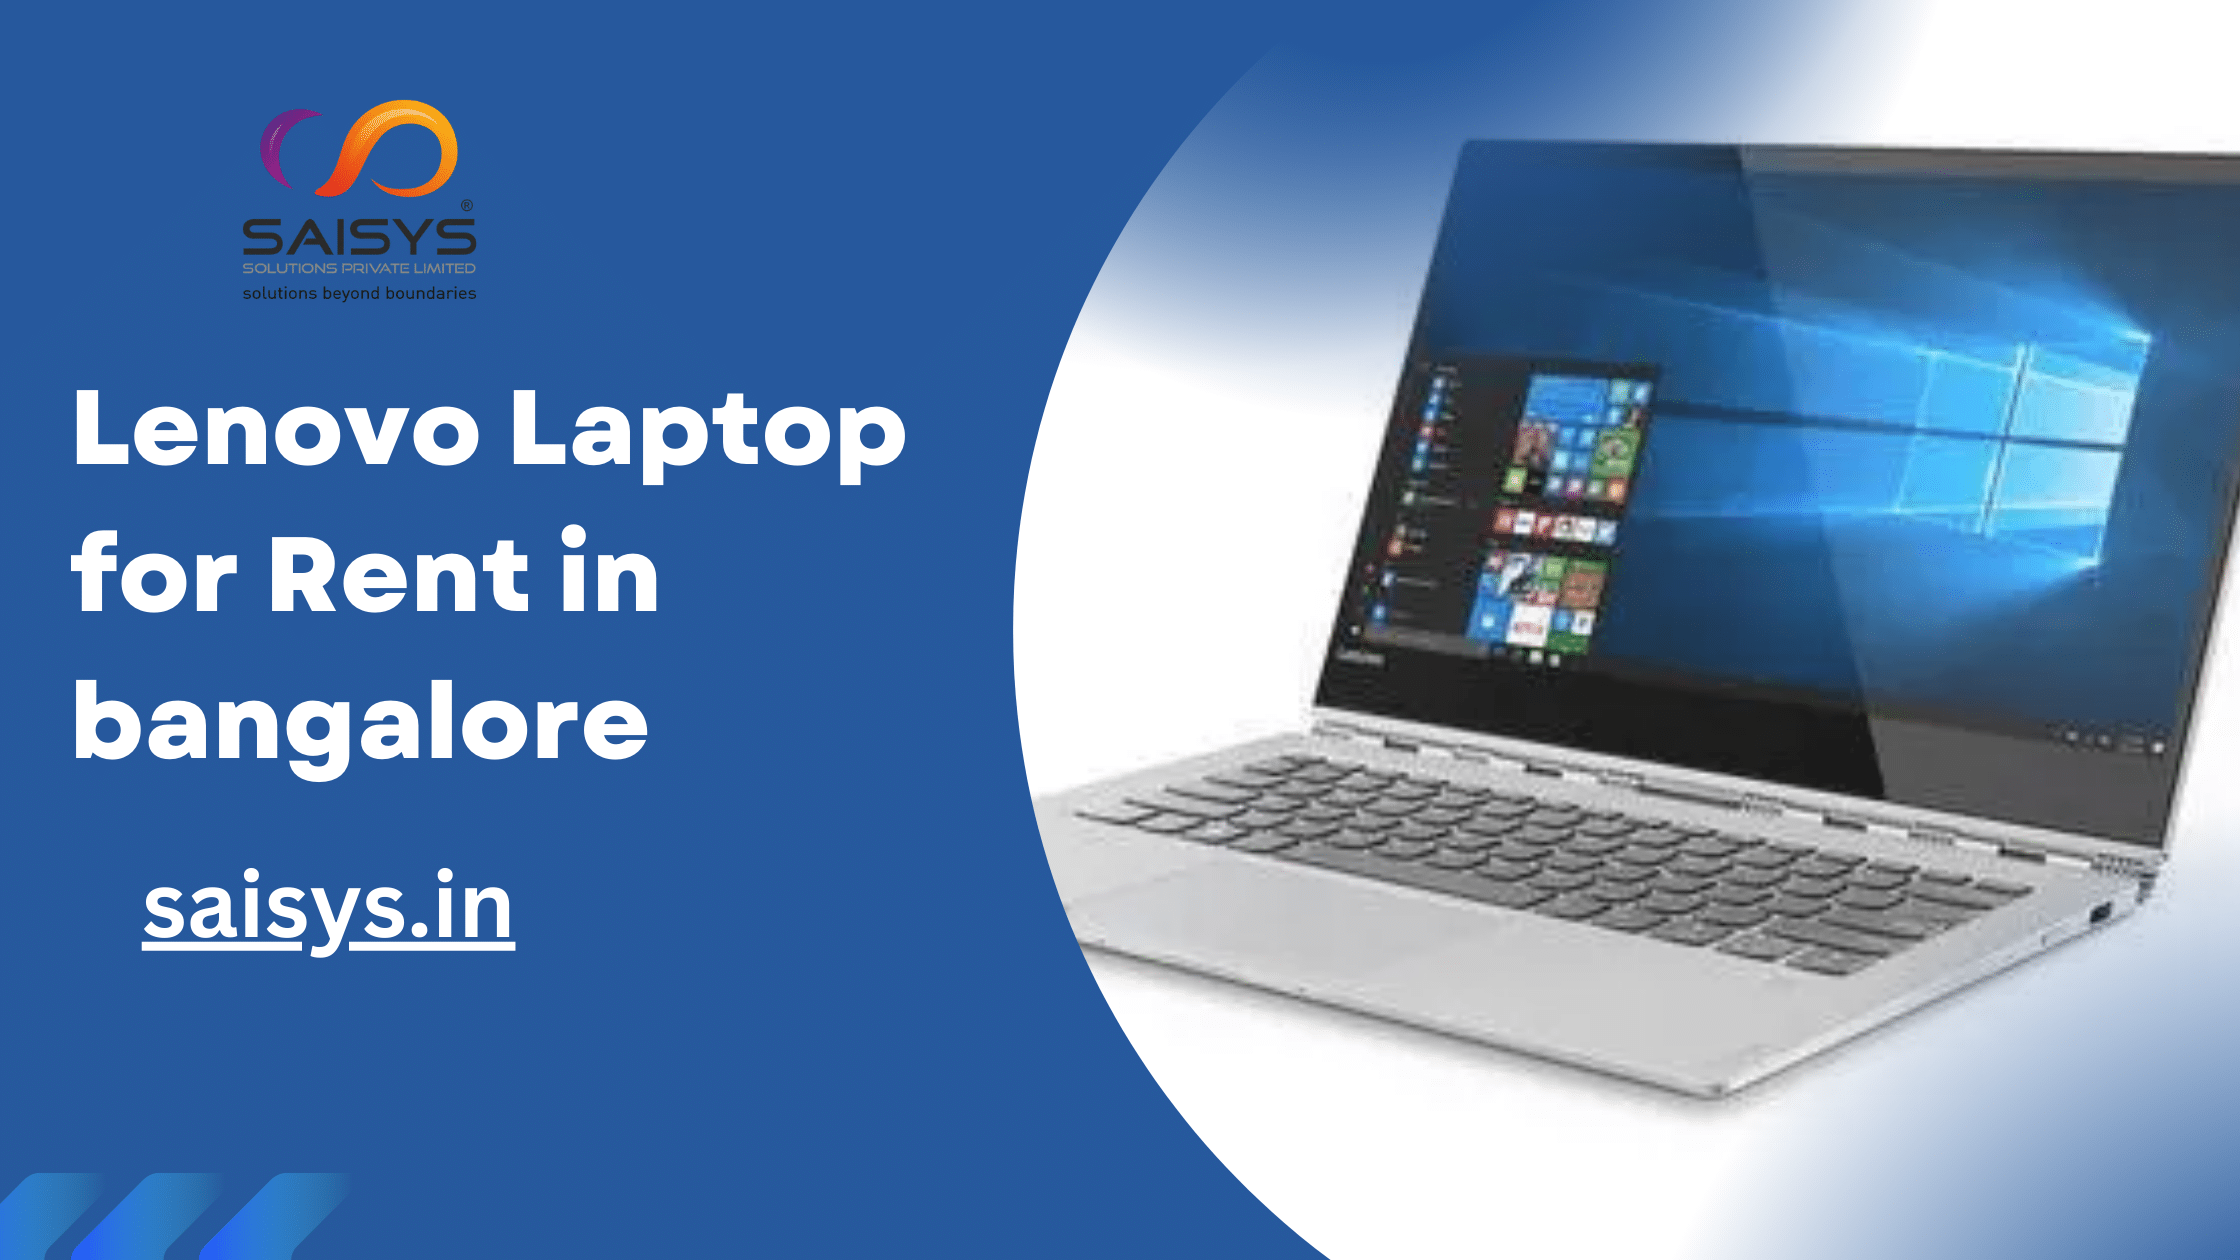 Lenovo Laptop for Rent in Bangalore